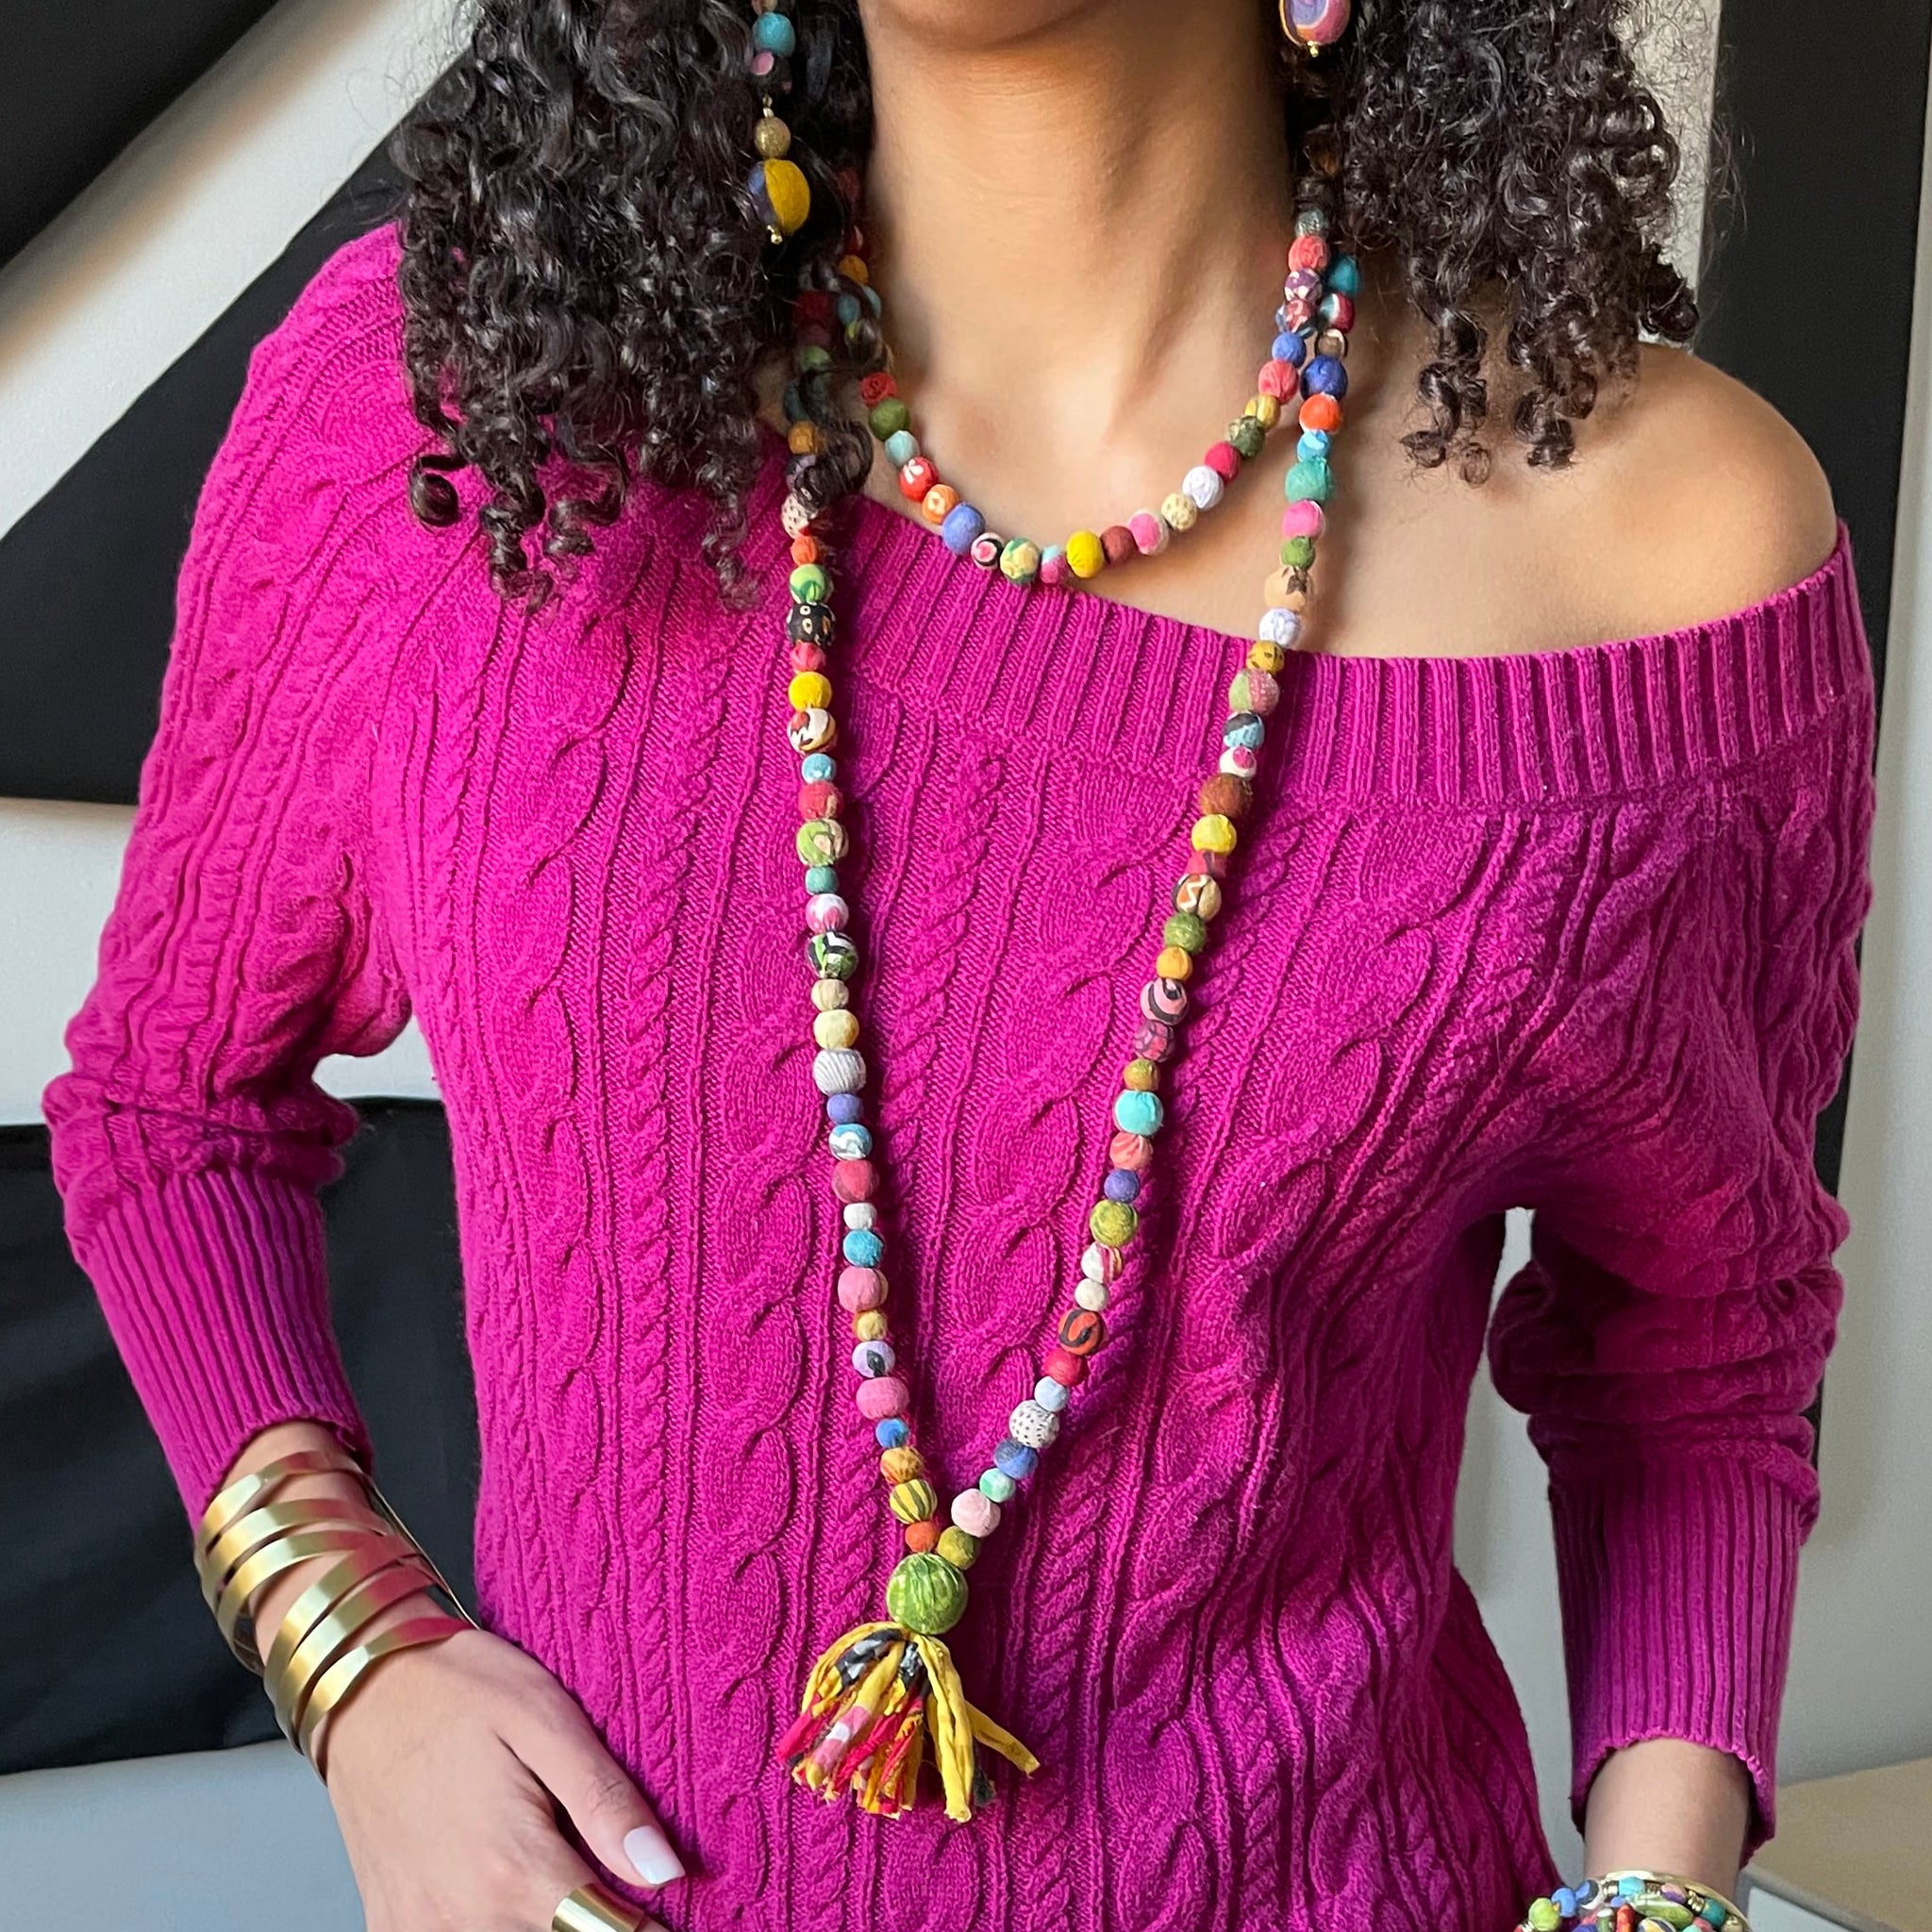 A close up of a woman modeling a colorful two-stranded necklace.